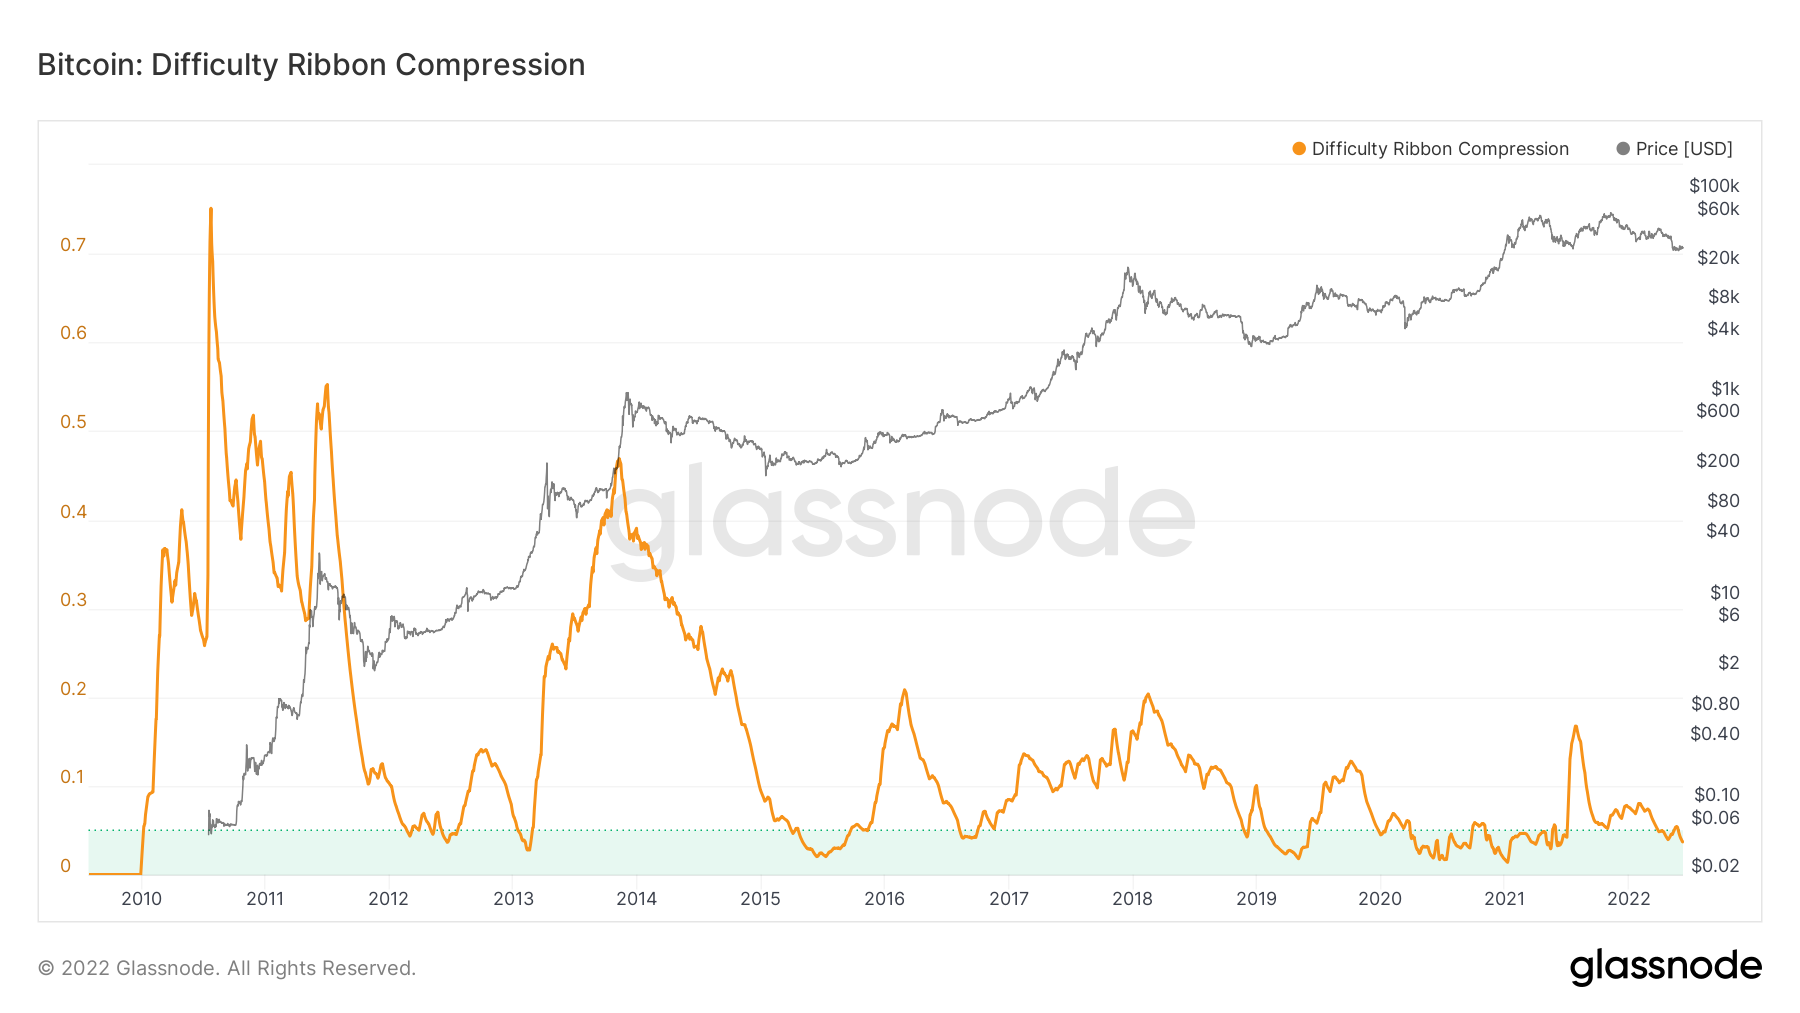 BTC Difficulty compressions